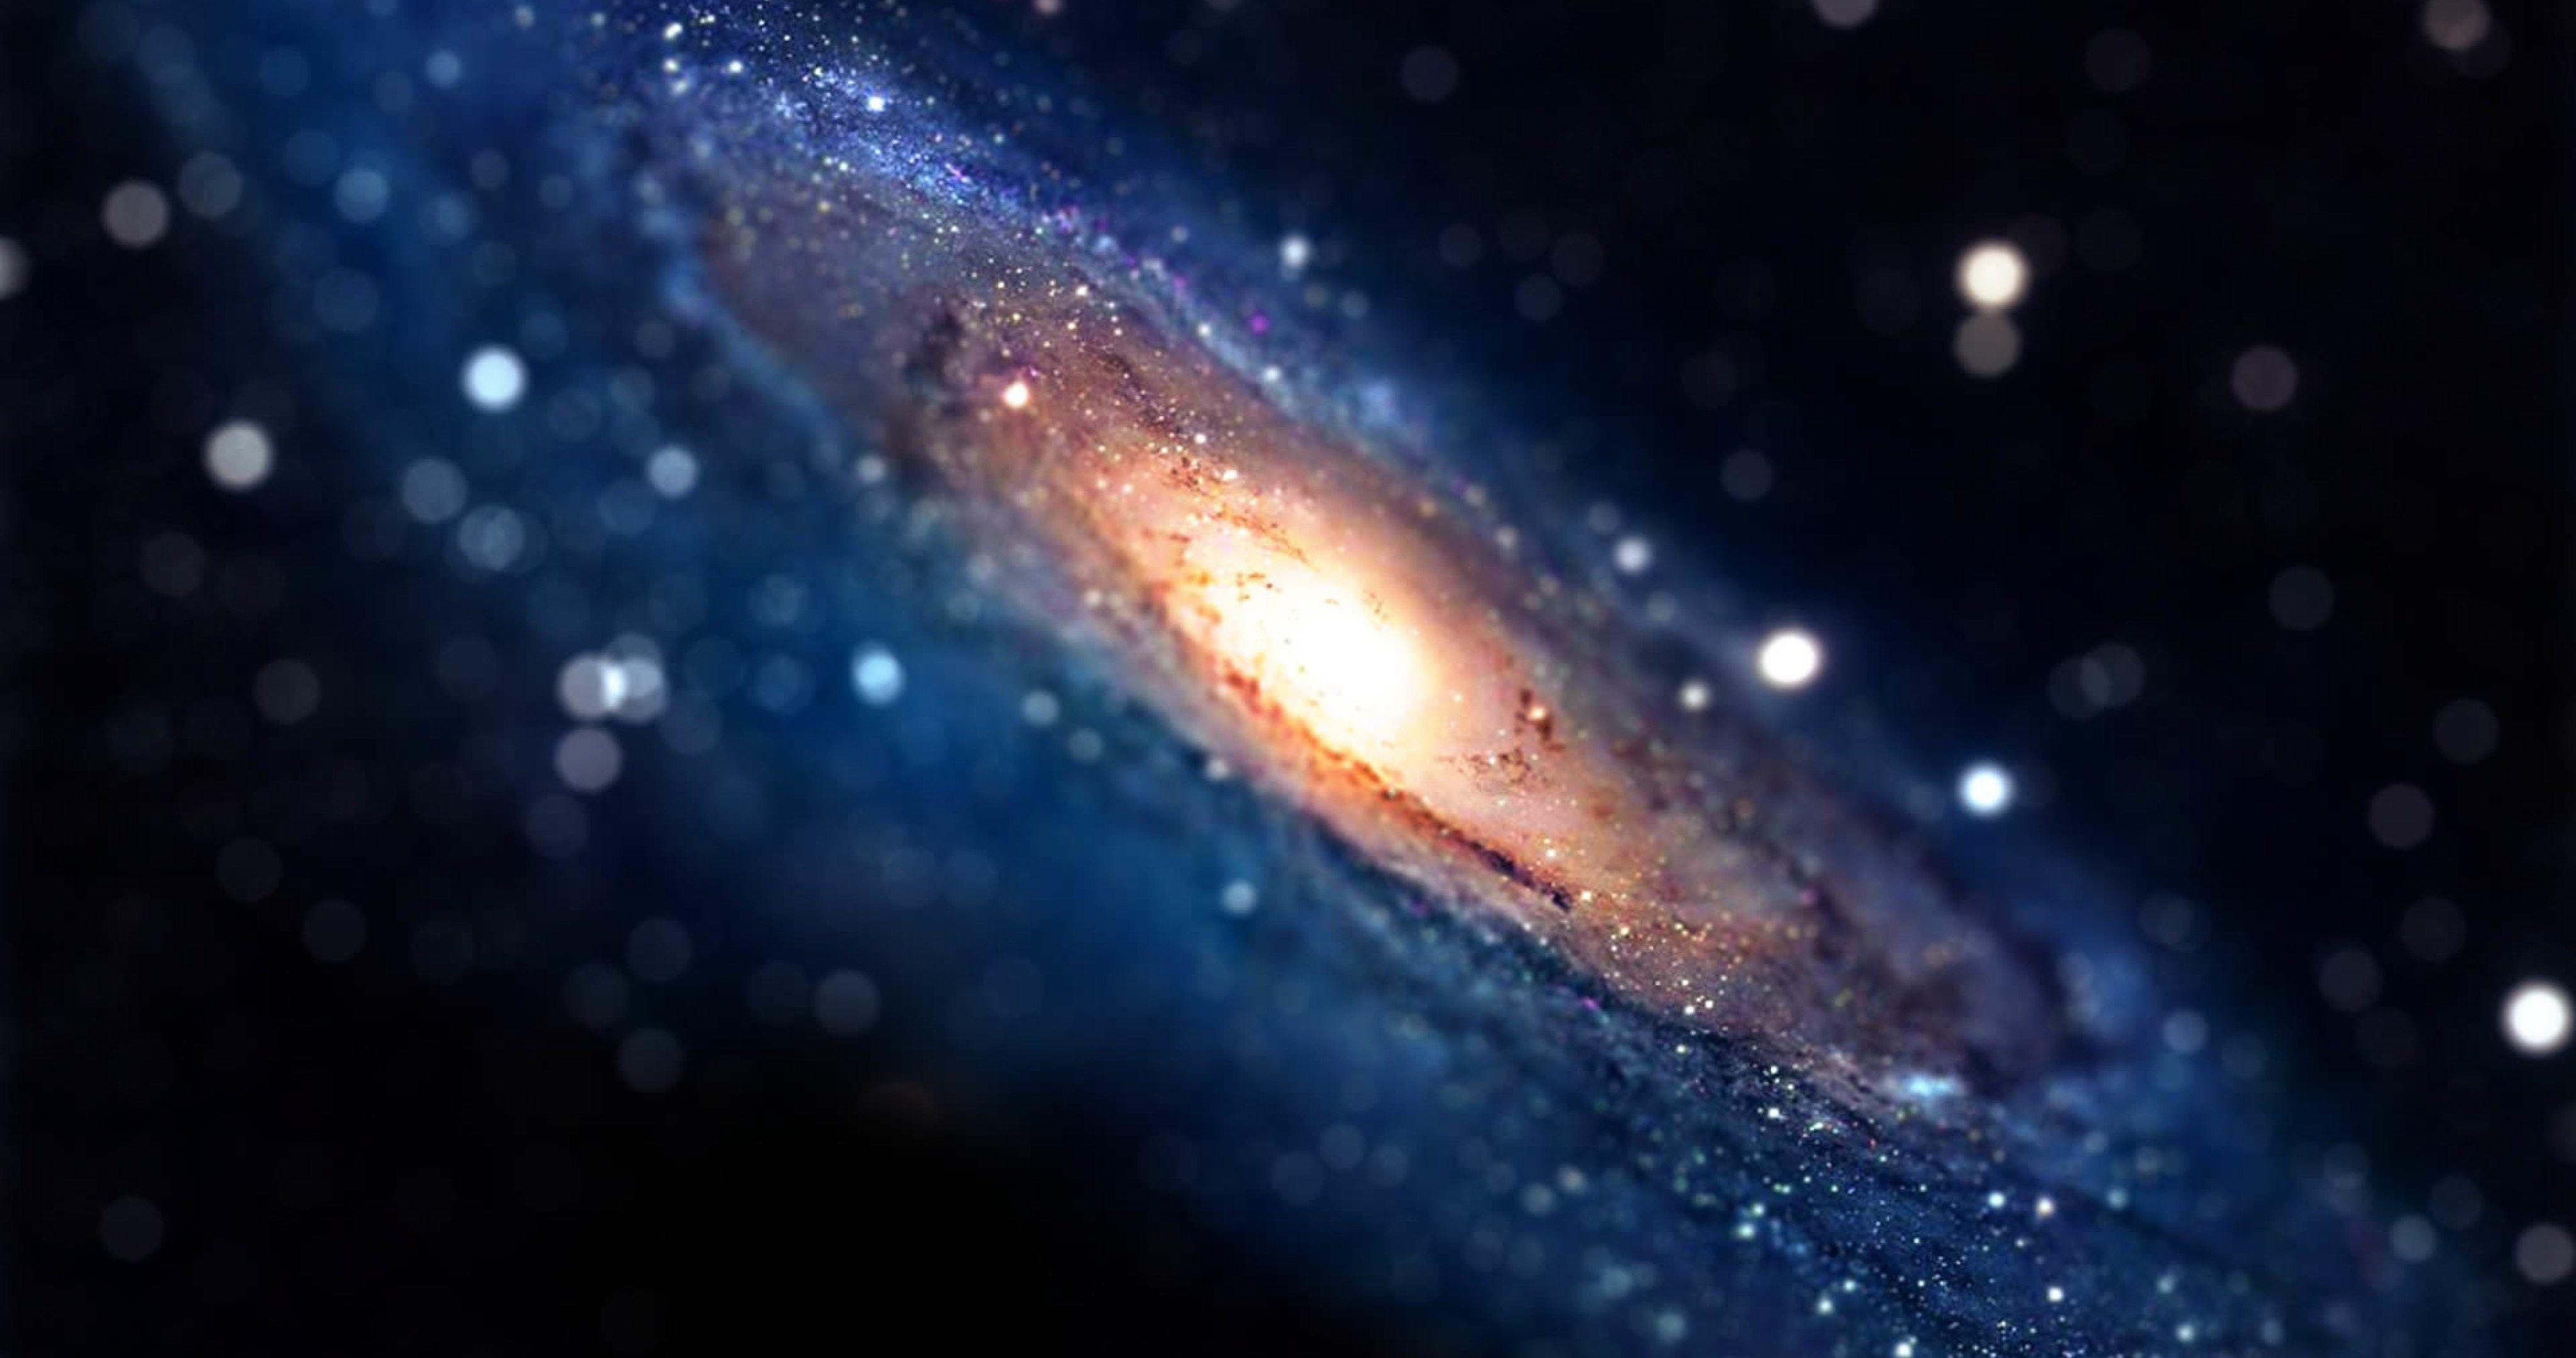 HD Galaxy Wallpaper On For Your Desktop